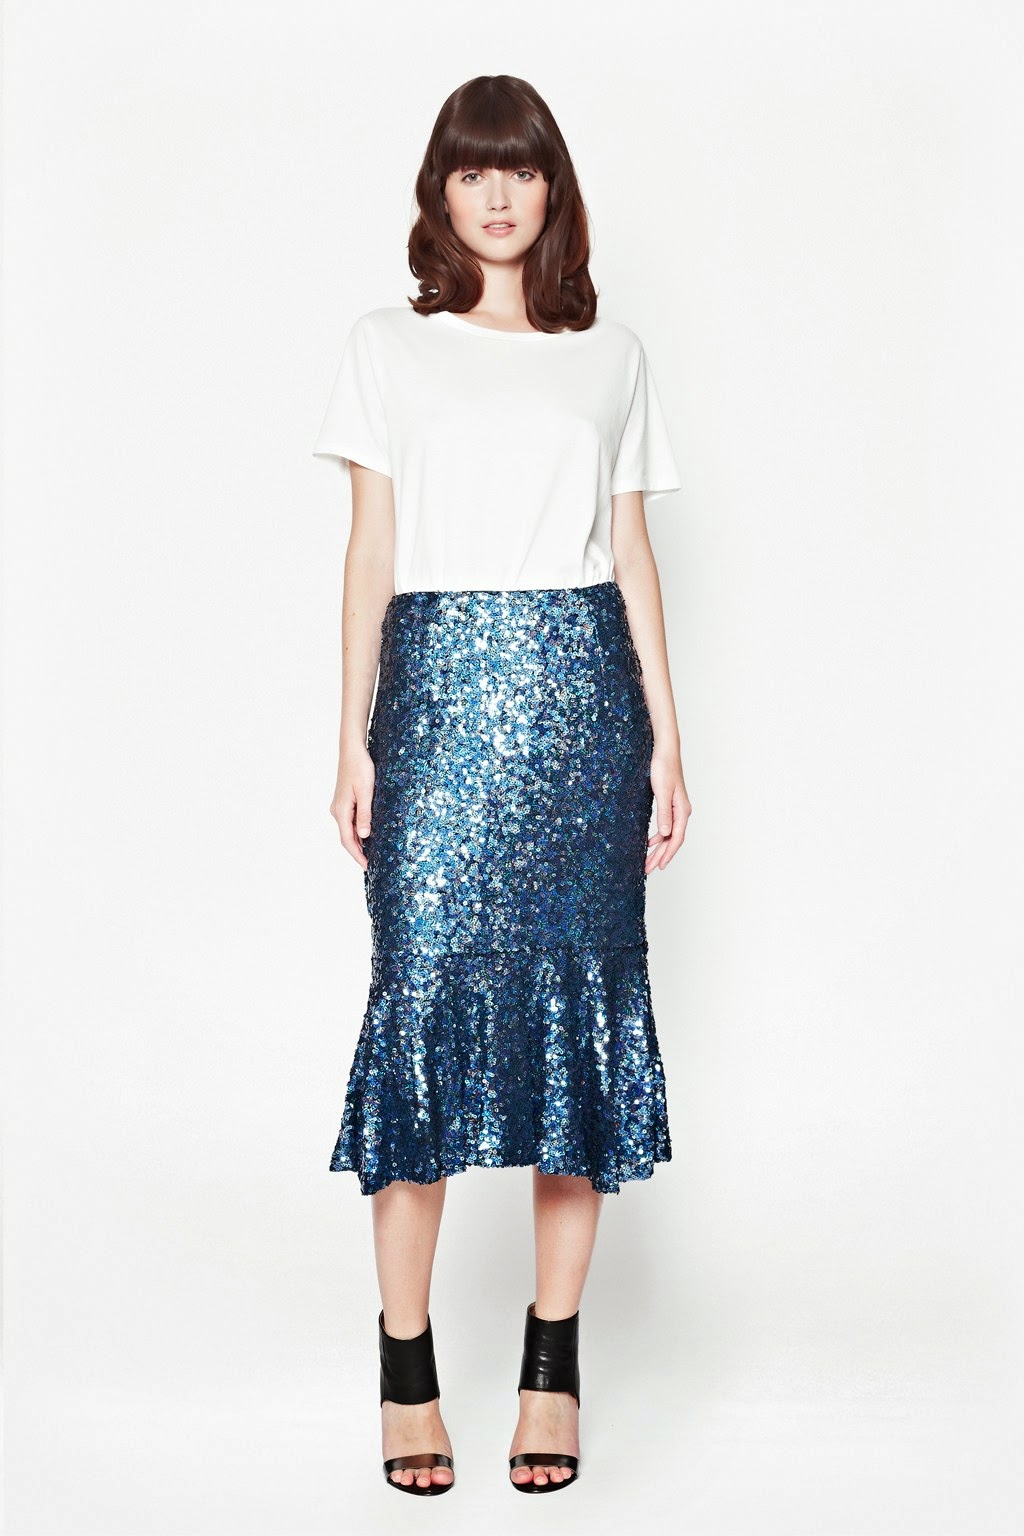 School Run Style: A Sprinkle of Sparkle and Shimmer